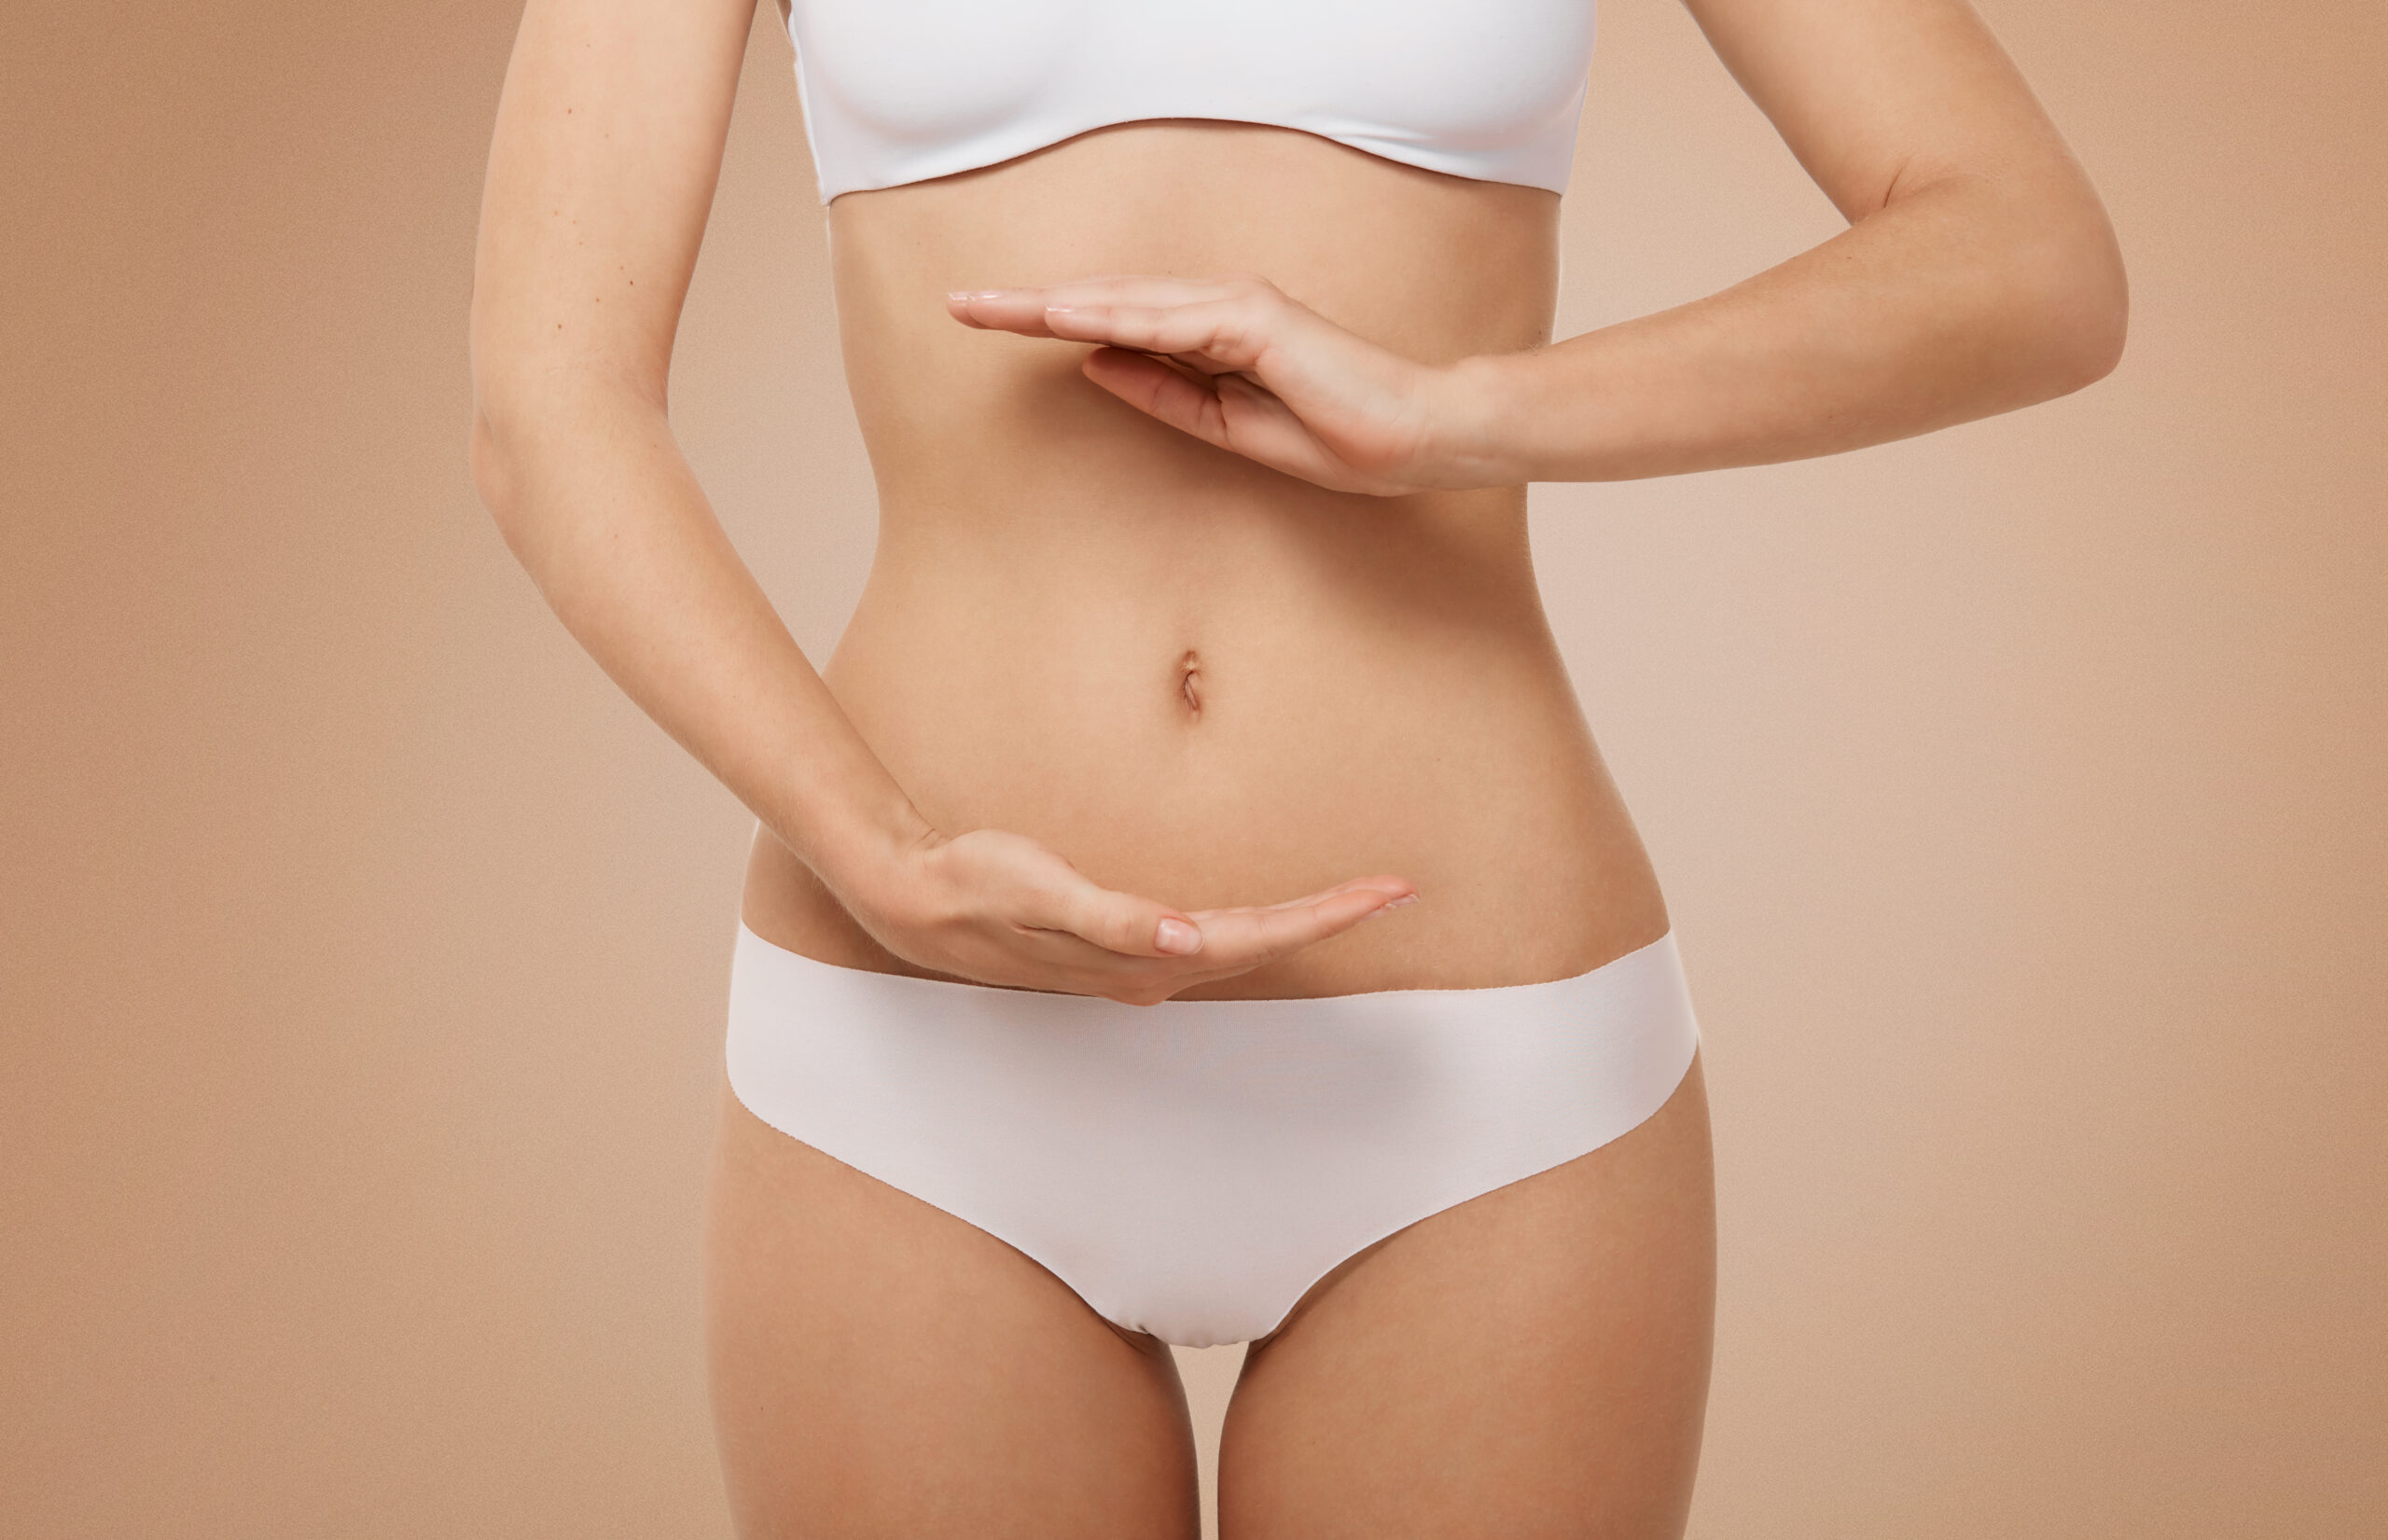 Bloated Stomach: What Is, Symptoms, Causes, and Diagnosis